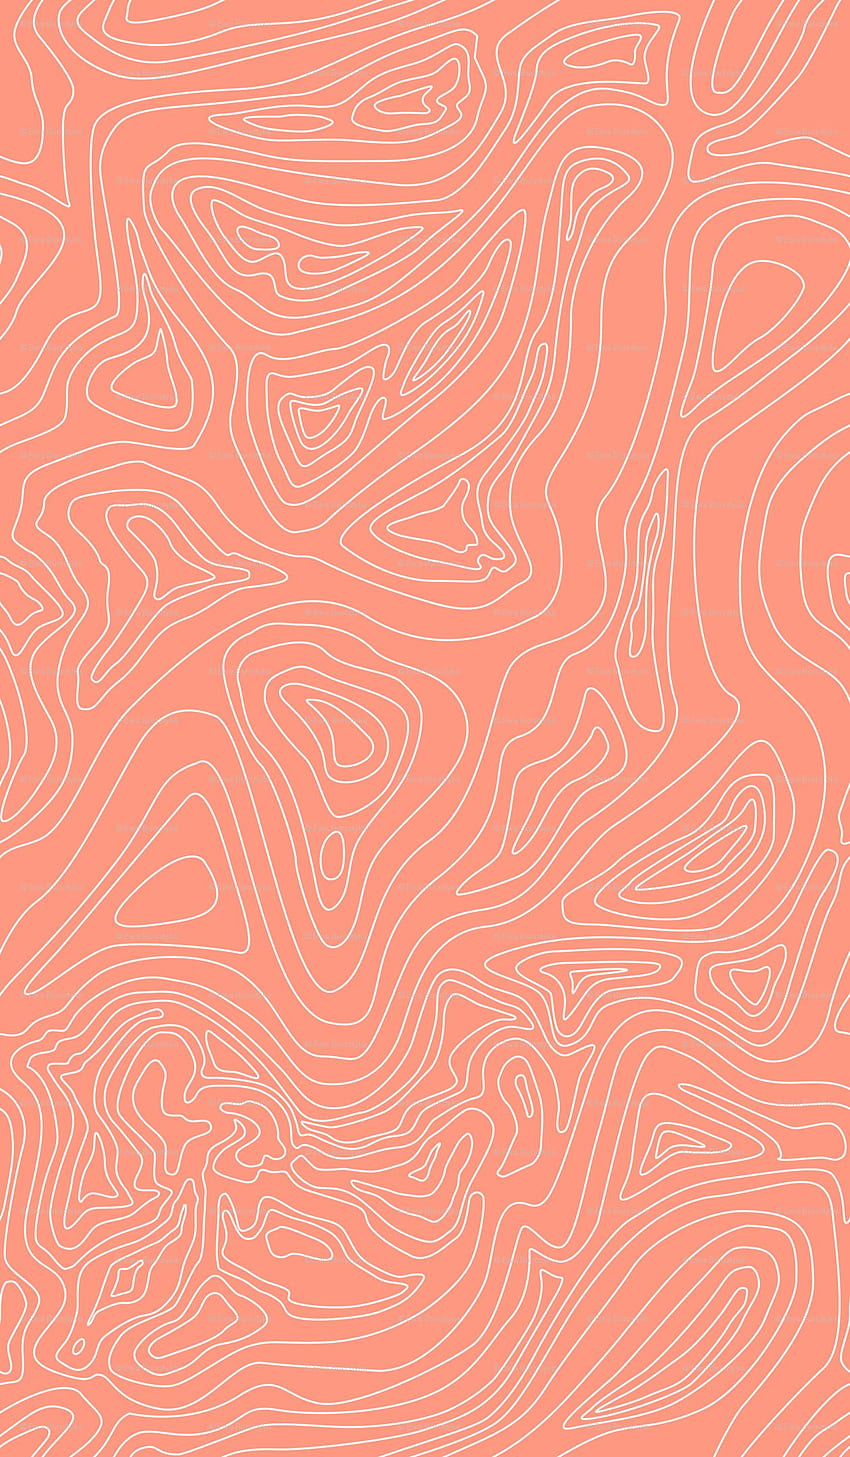 A seamless pattern of lines on an orange background - Salmon